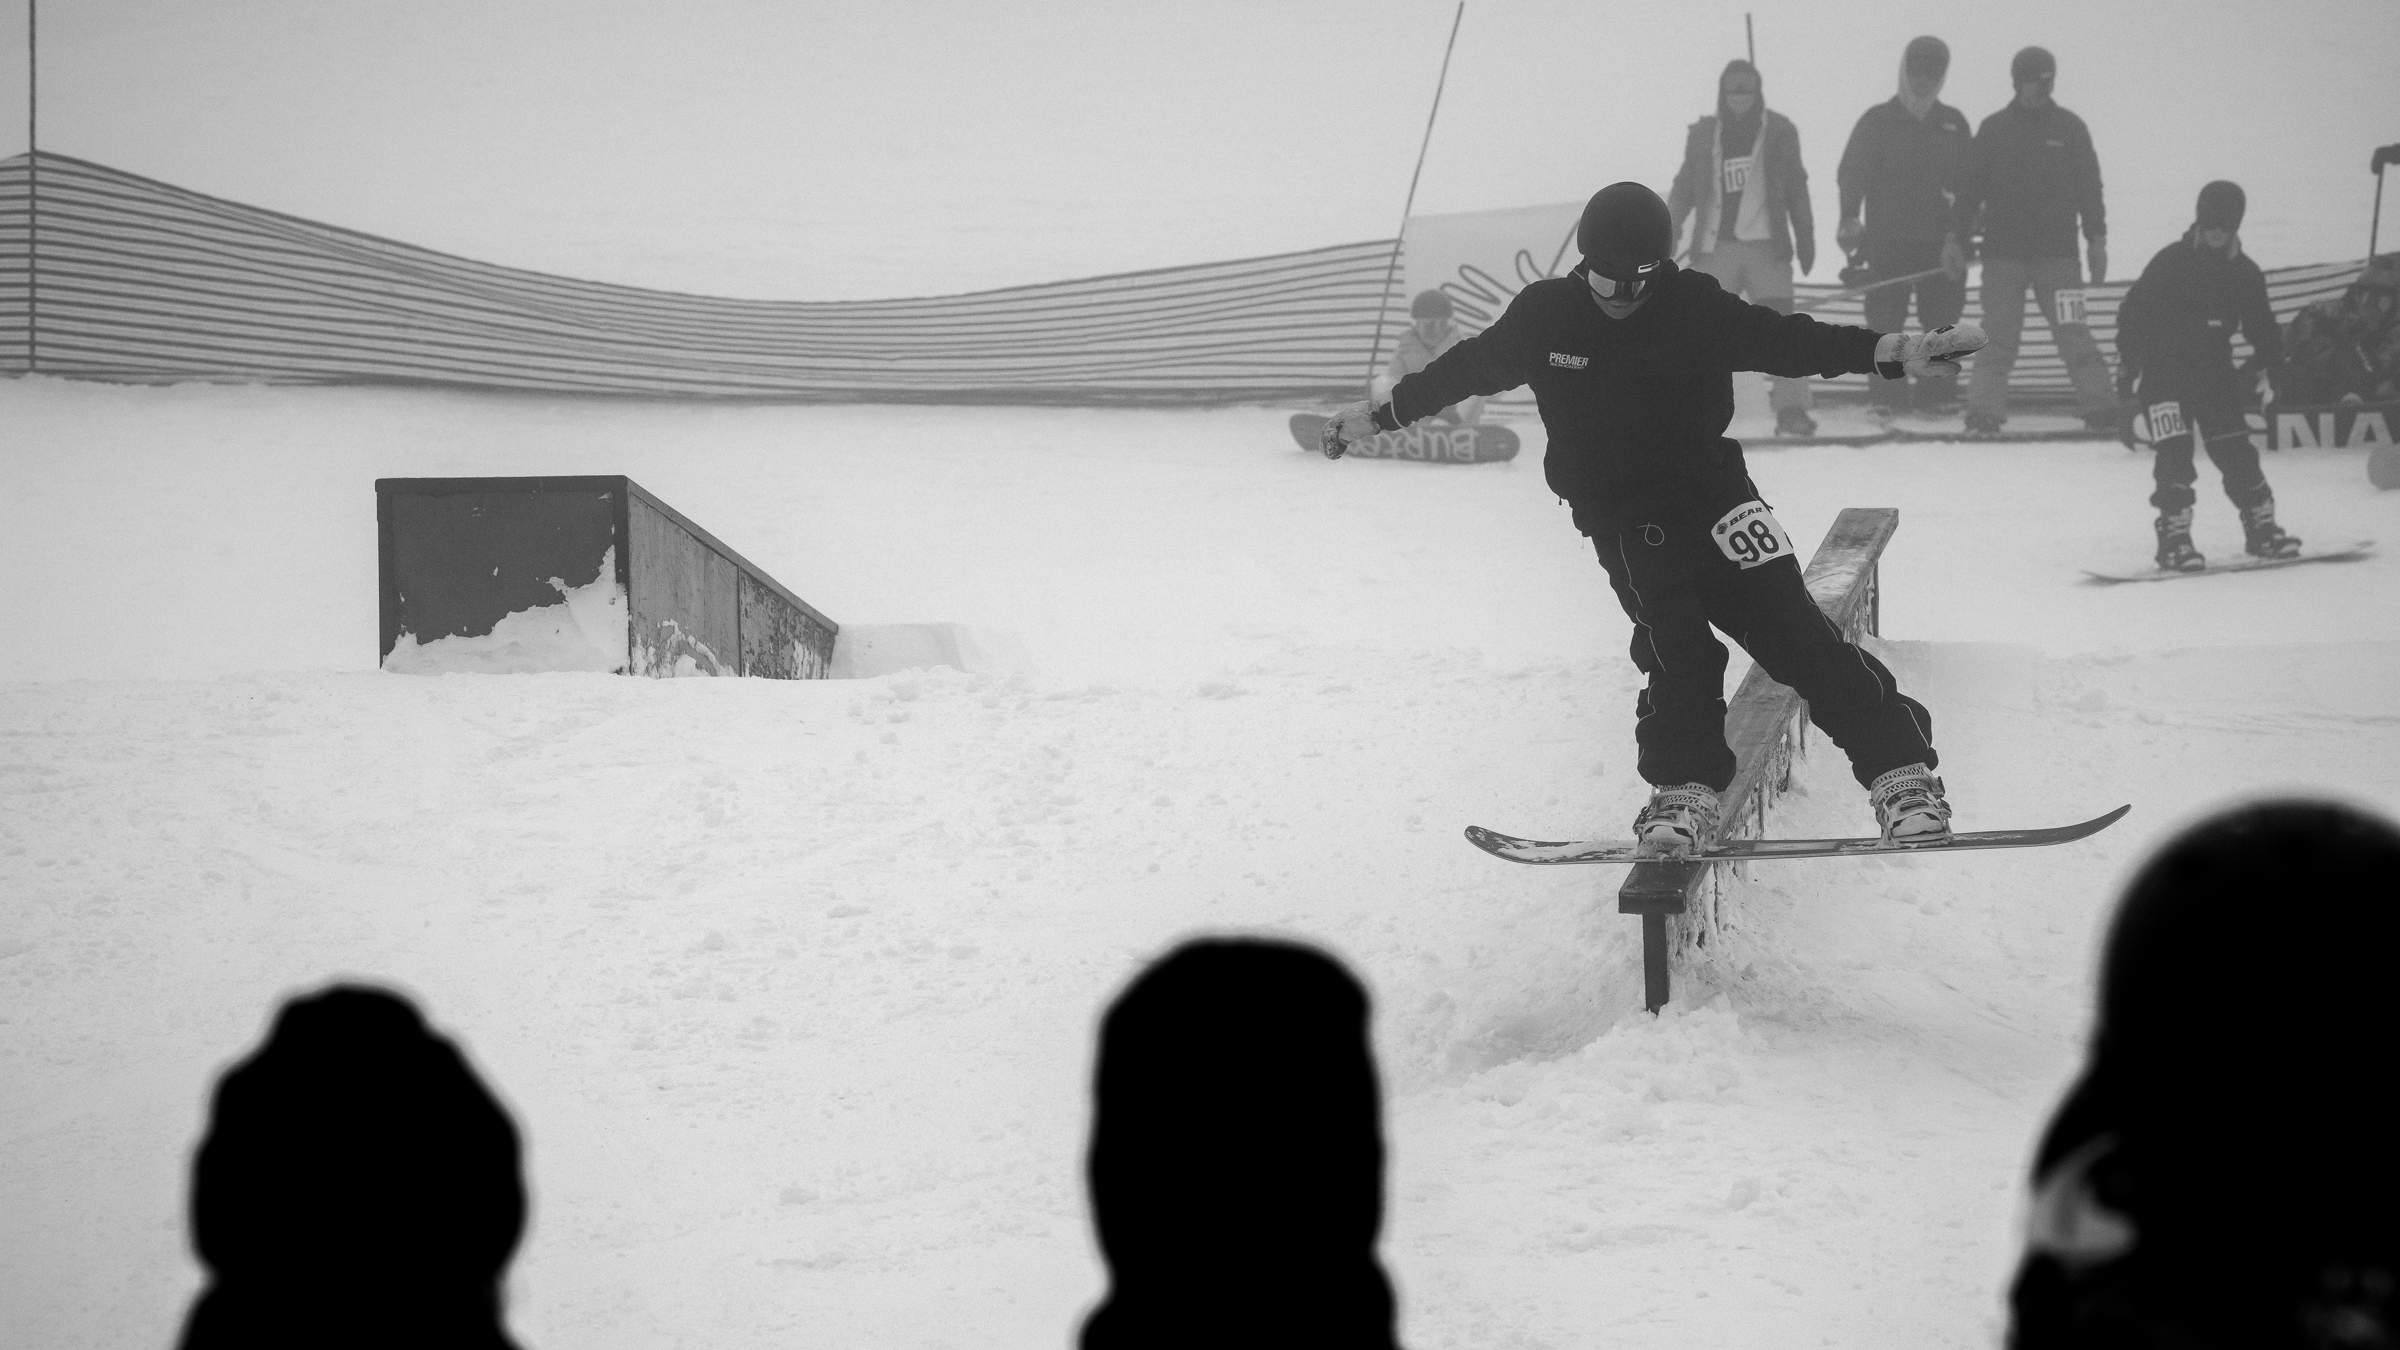 Black and white photo of a snowboarder doing a trick on a snow rail